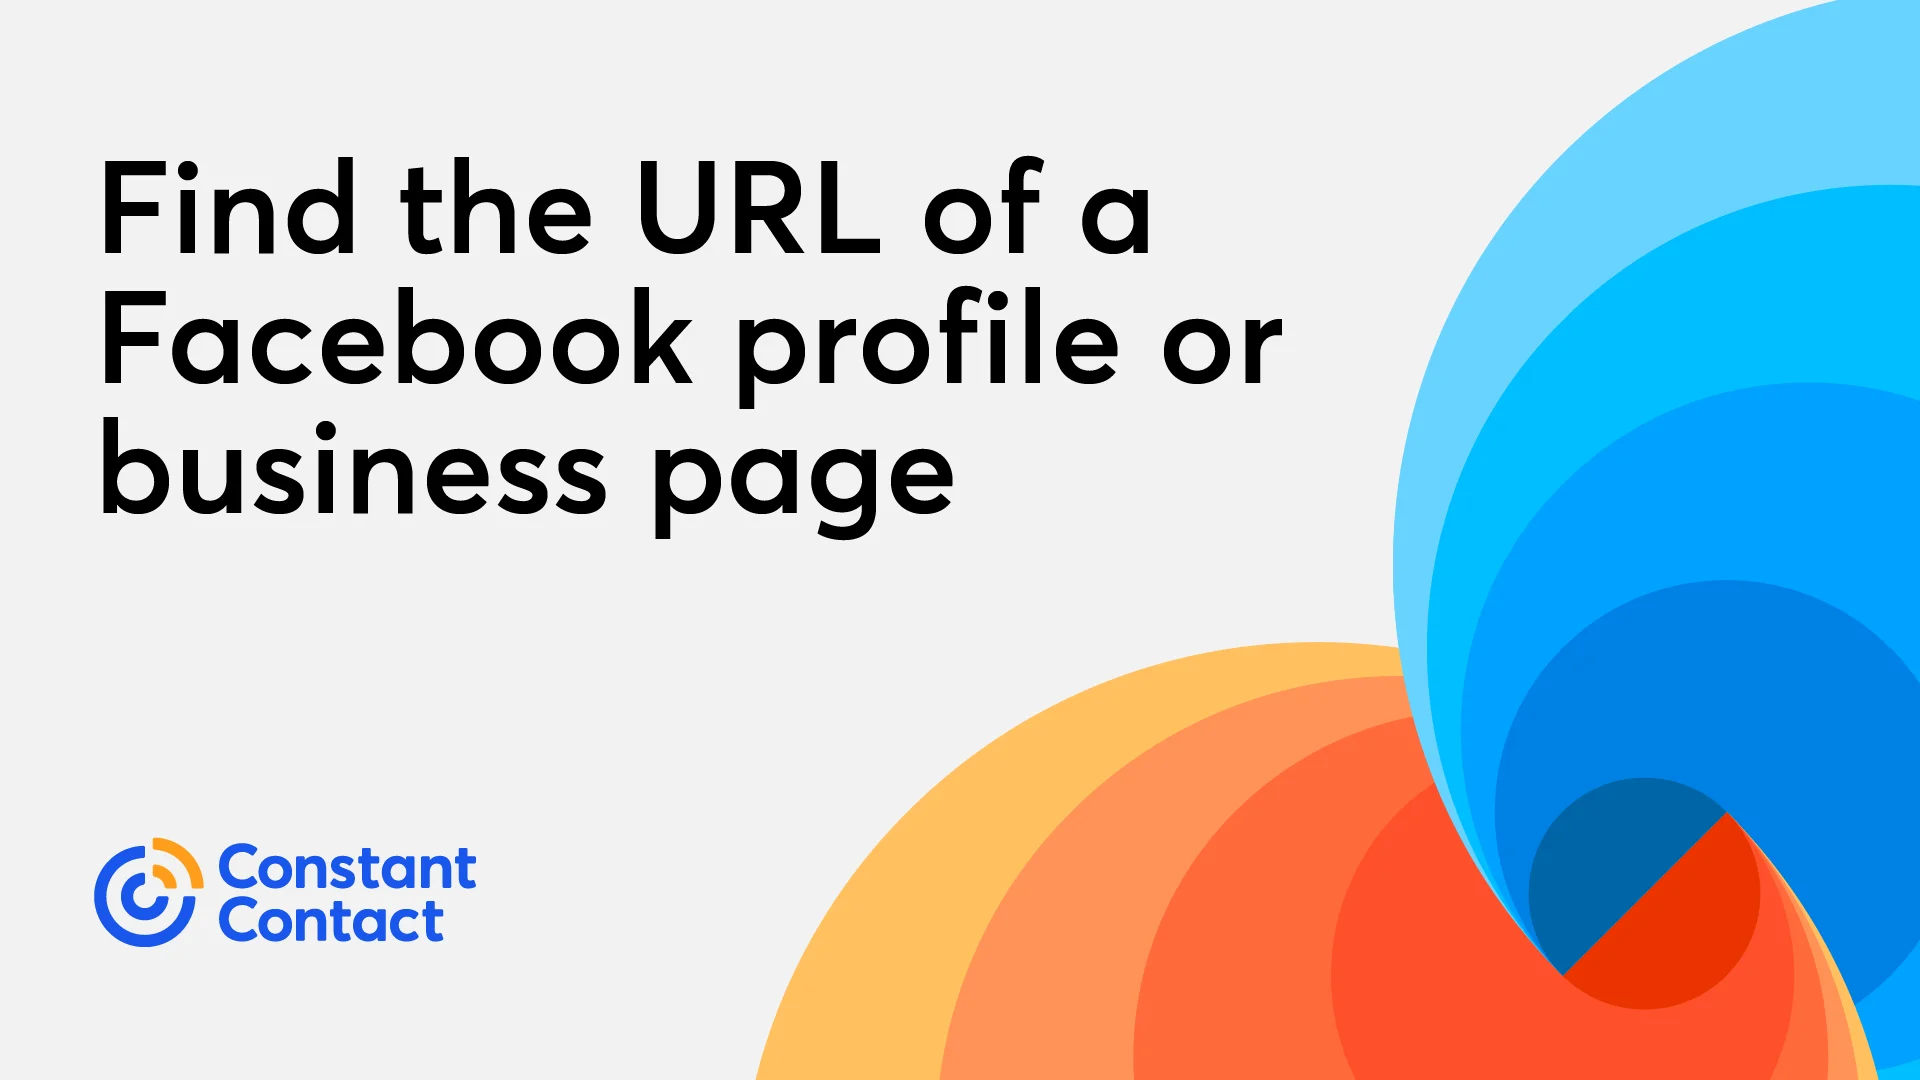 Find the URL for a Facebook profile or business page